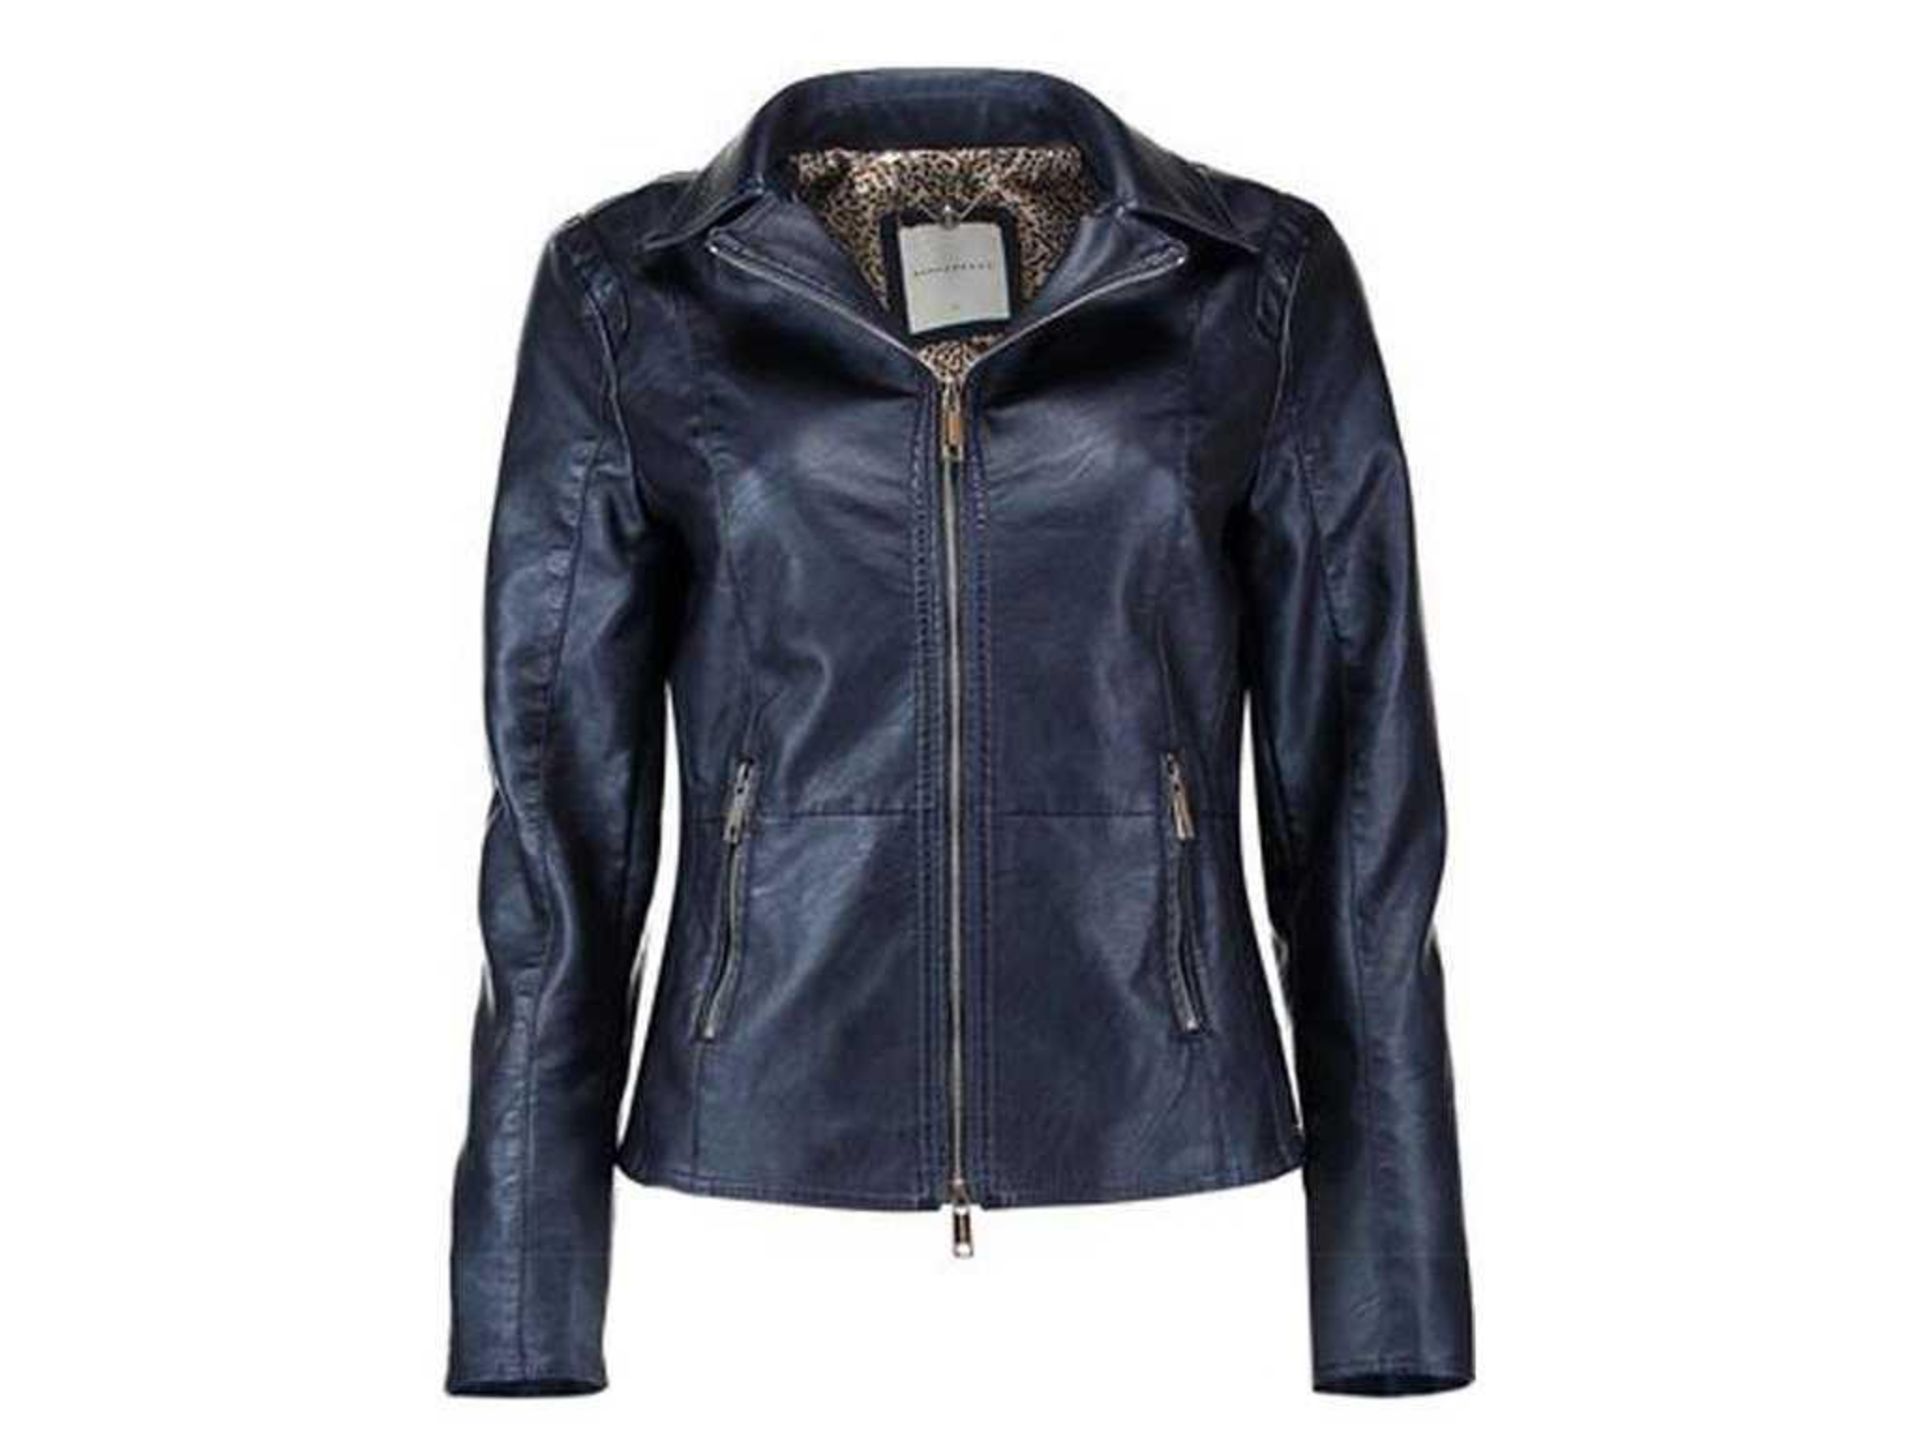 Rrp £90 Lot To Contain 3 Assorted Women'S Leather Biker Jackets - Image 3 of 3